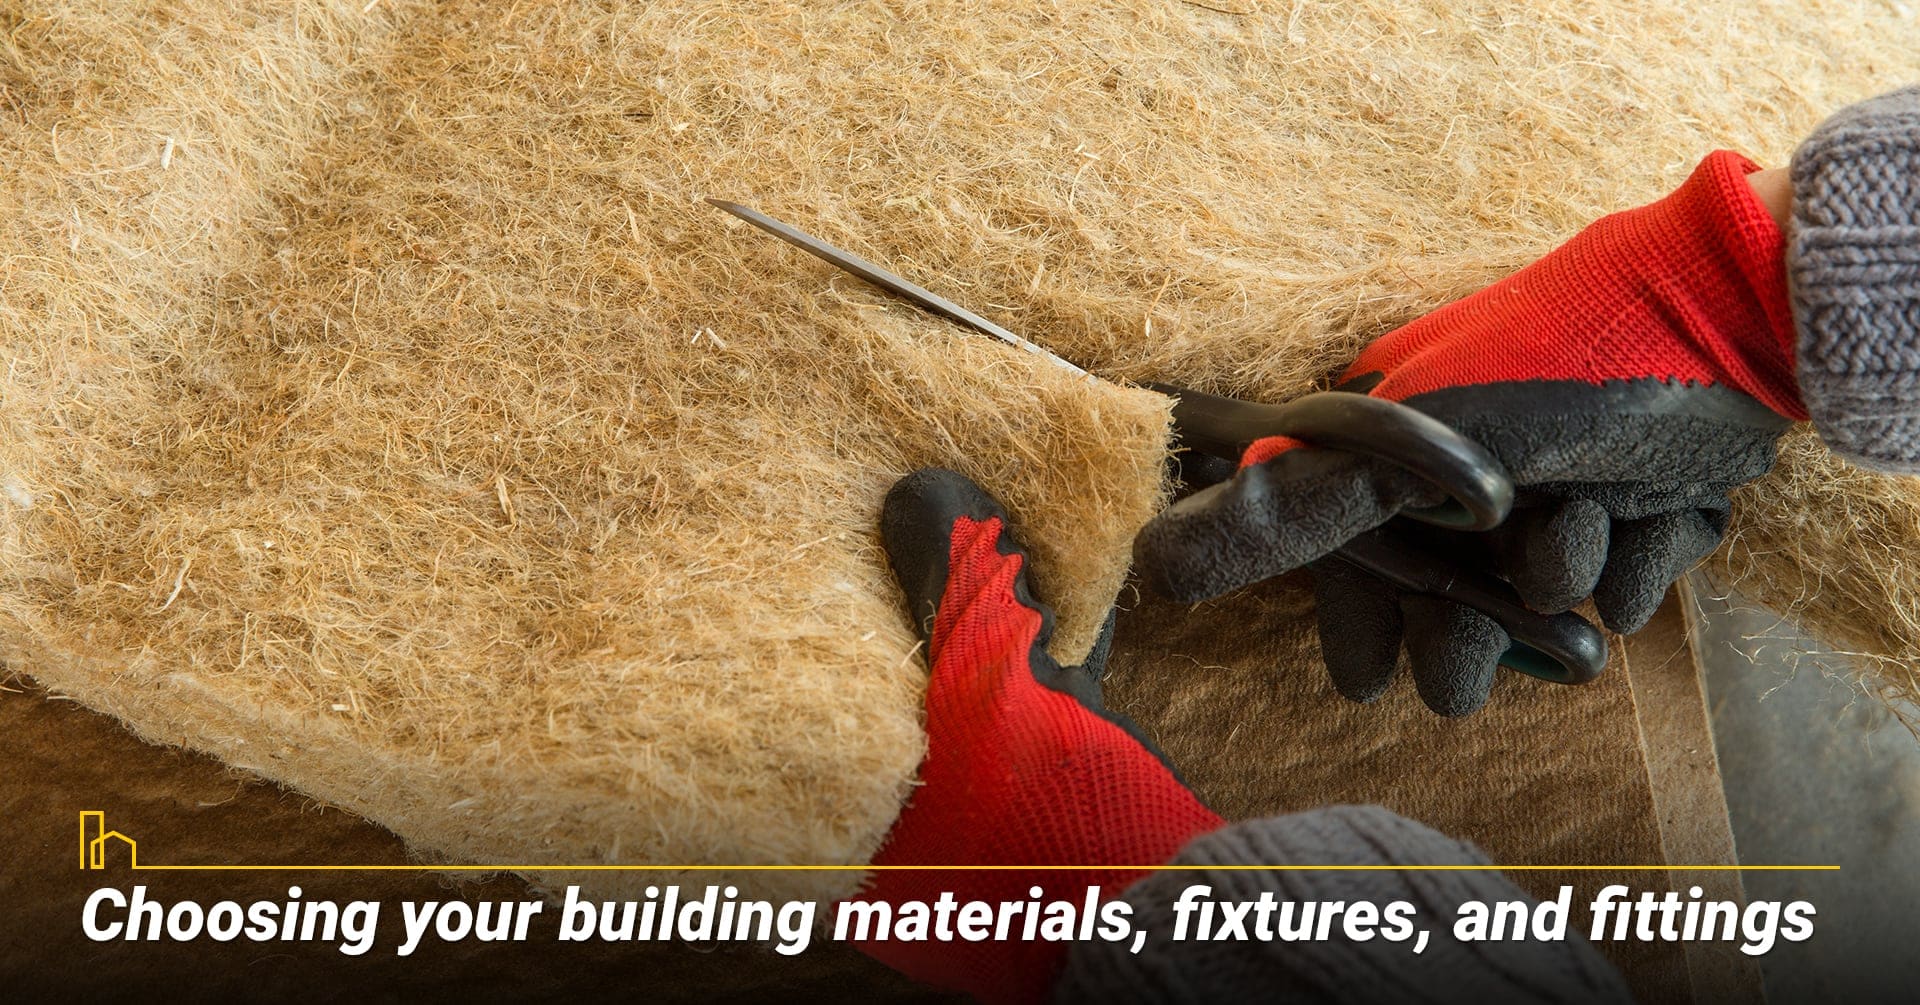 Choosing your building materials, fixtures, and fittings, choosing the right materials